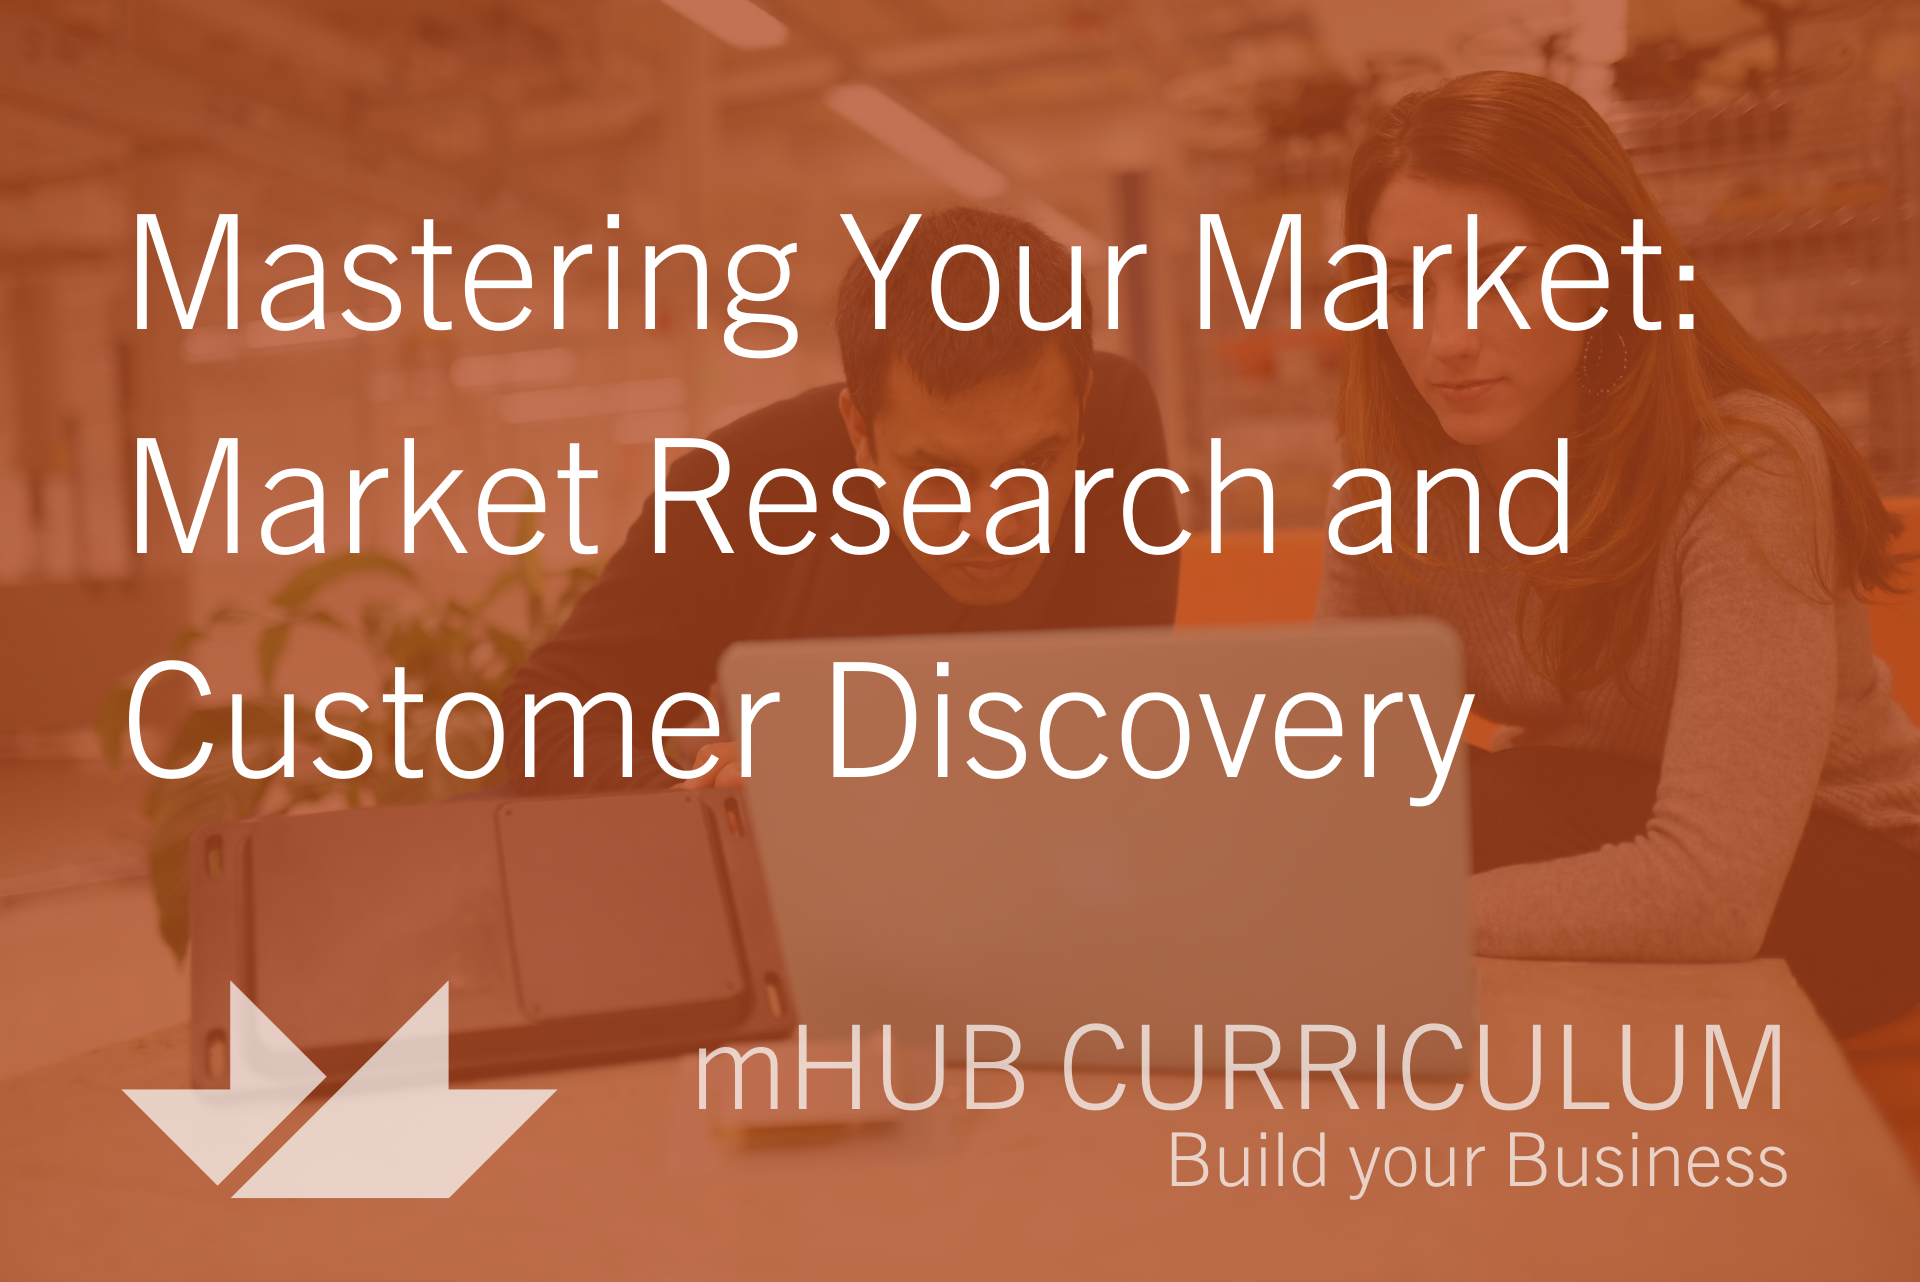 Mastering your Market: Market Research and Customer Discovery